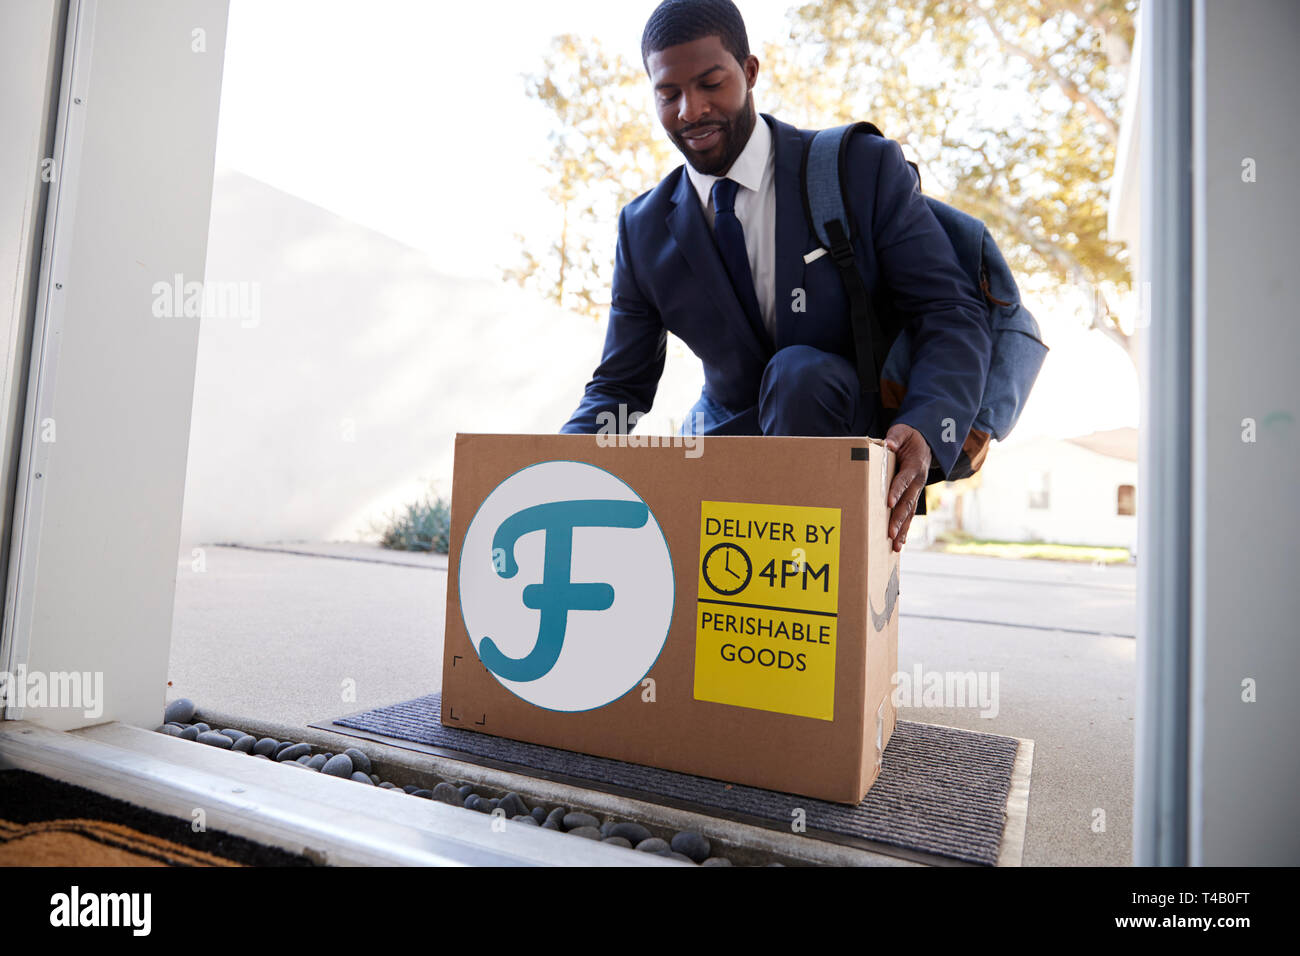 Businessman Coming Home To Fresh Food Home Delivery In Cardboard Box Outside Front Door Stock Photo